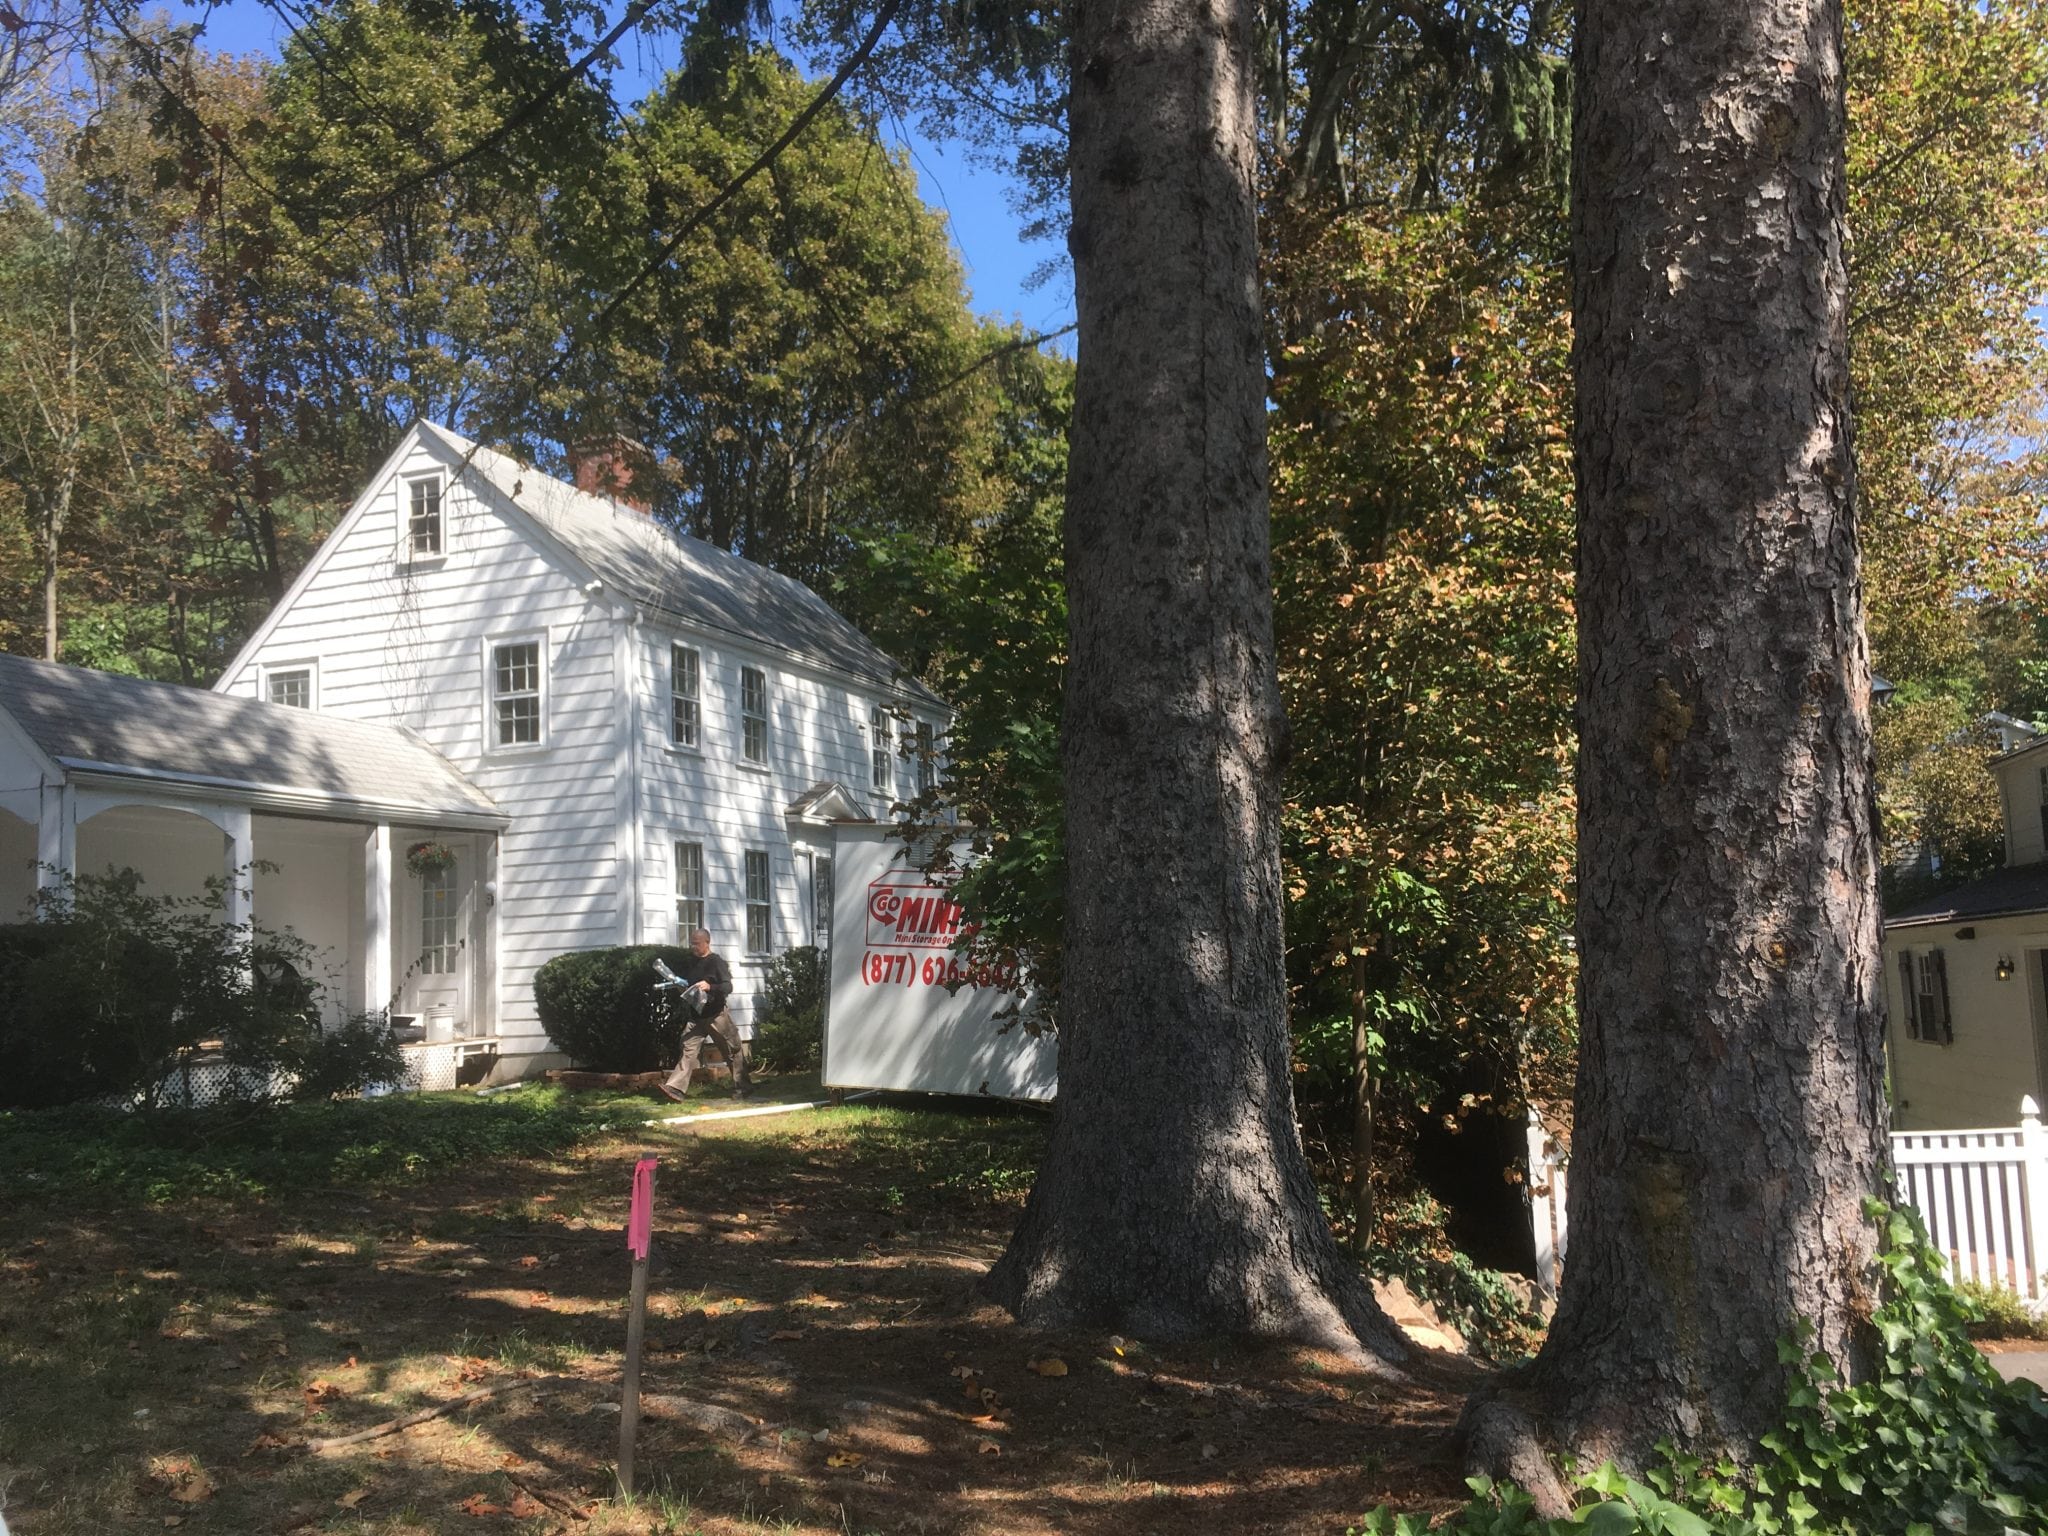 Shaw Road Airbnb Wellesley